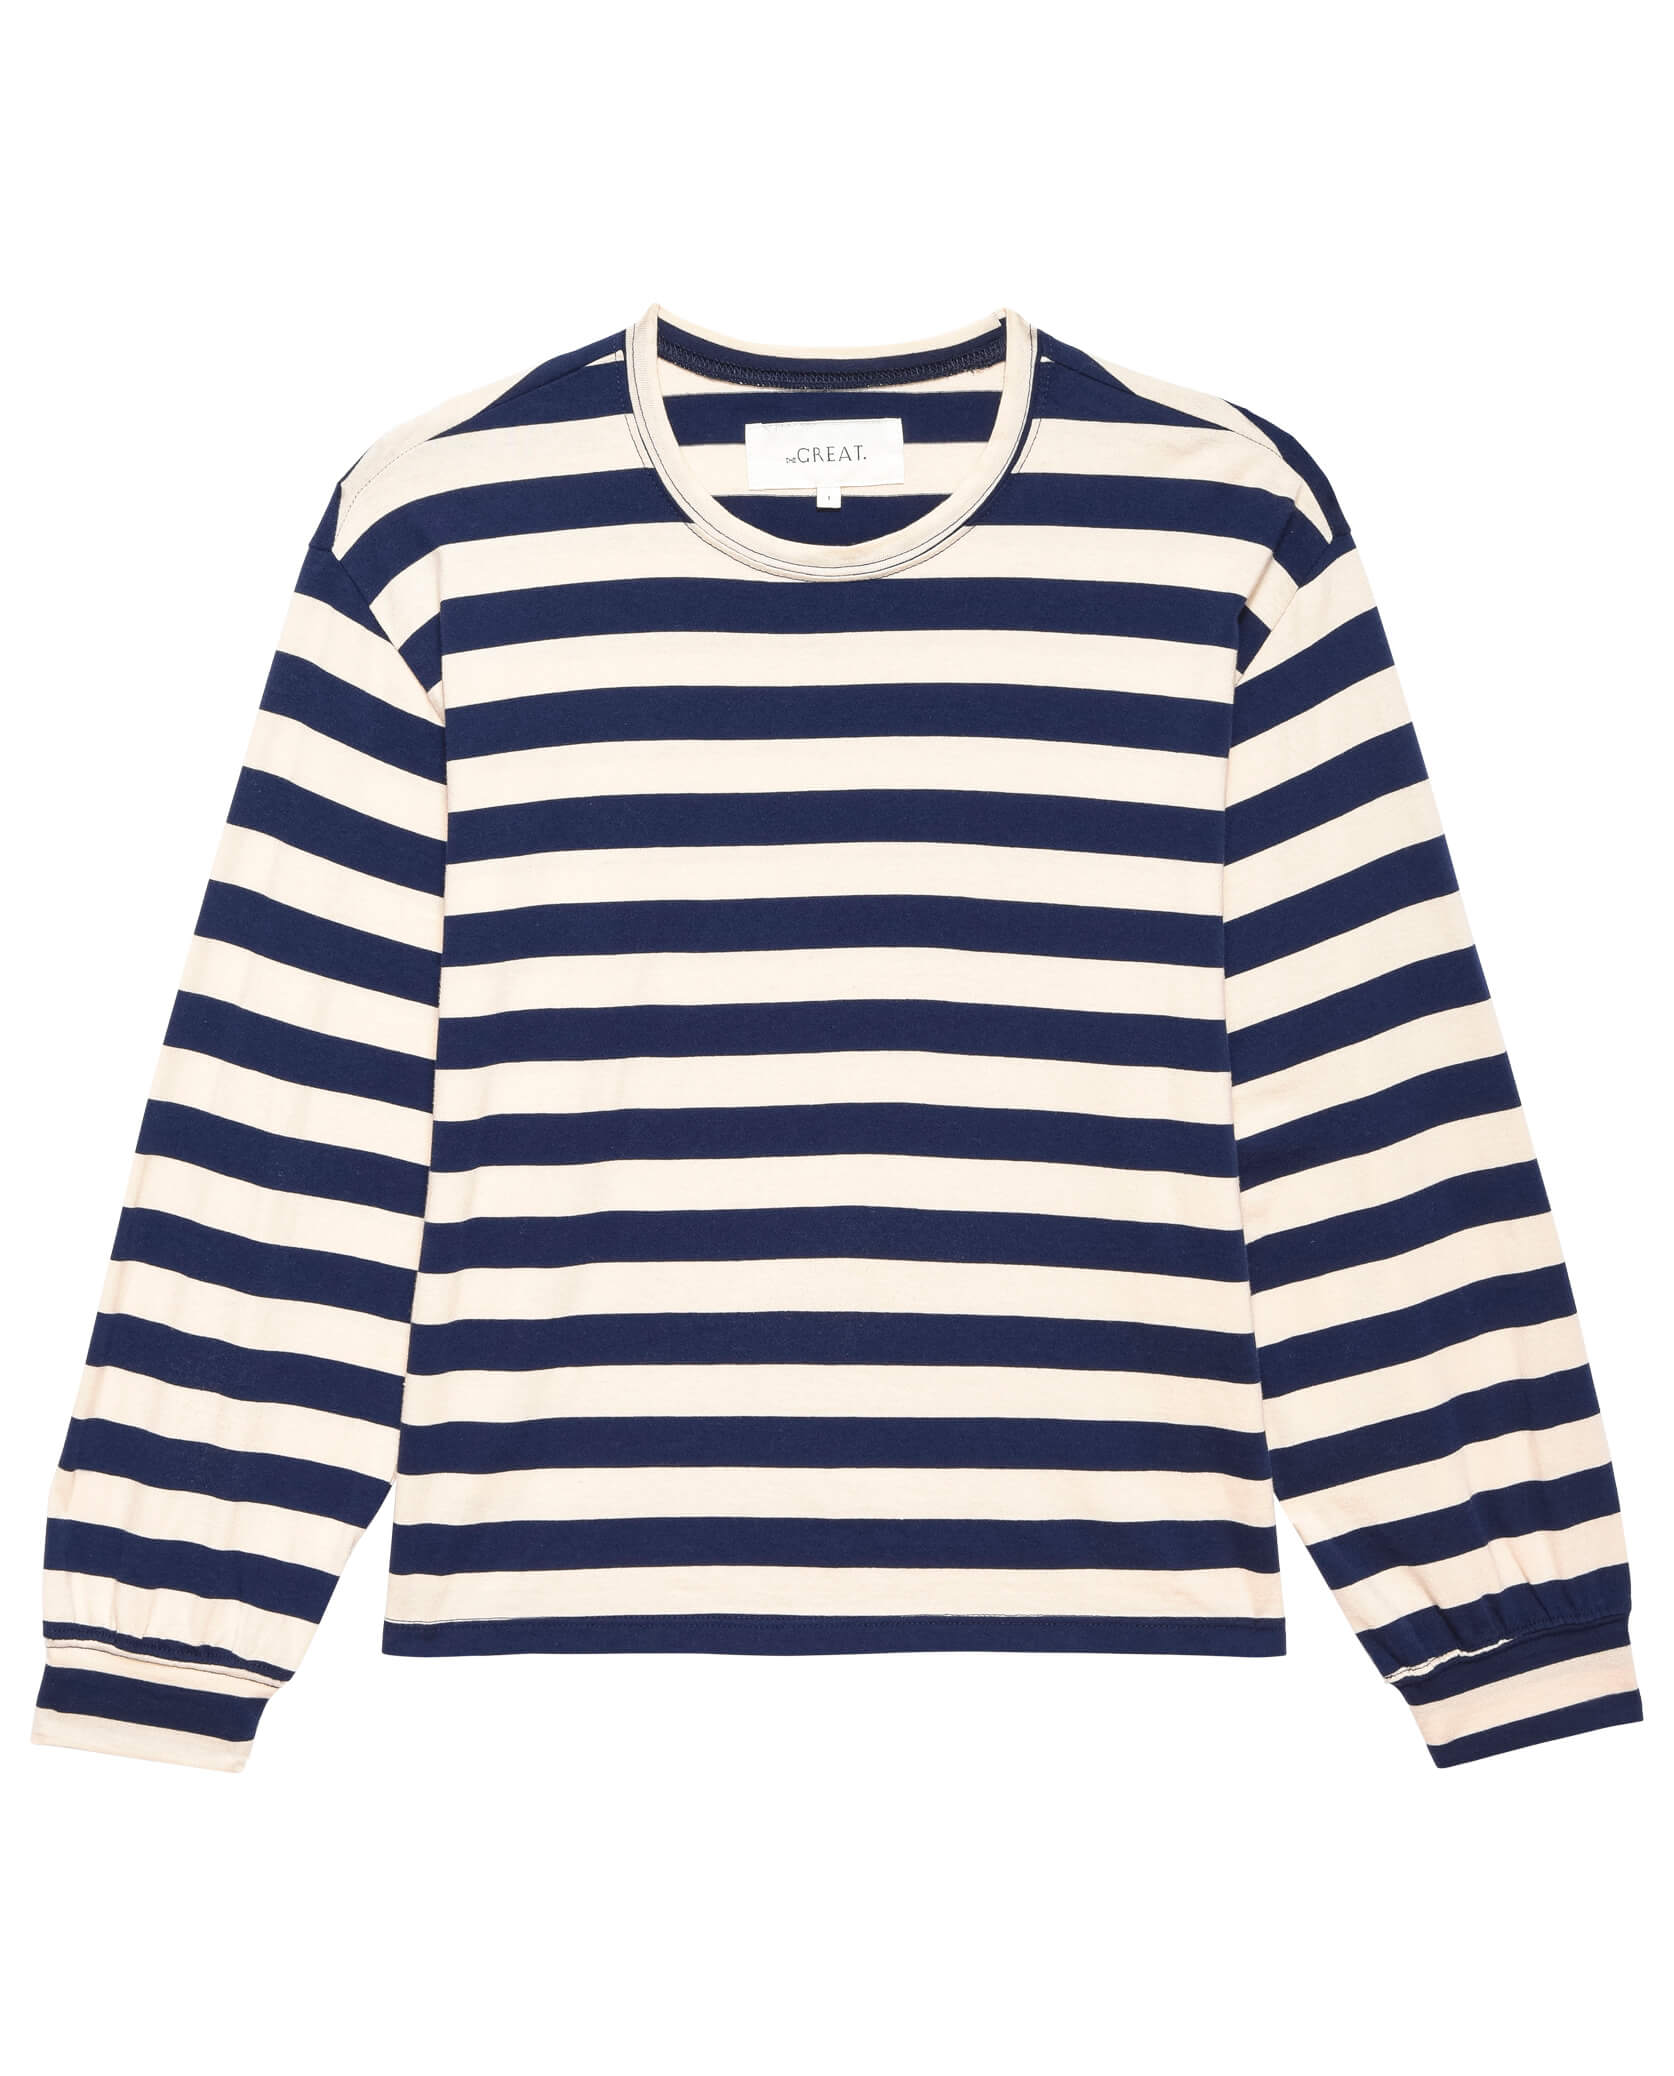 The Campus Crew. -- Navy and Cream Scholar Stripe TEES THE GREAT. PS24 SALE